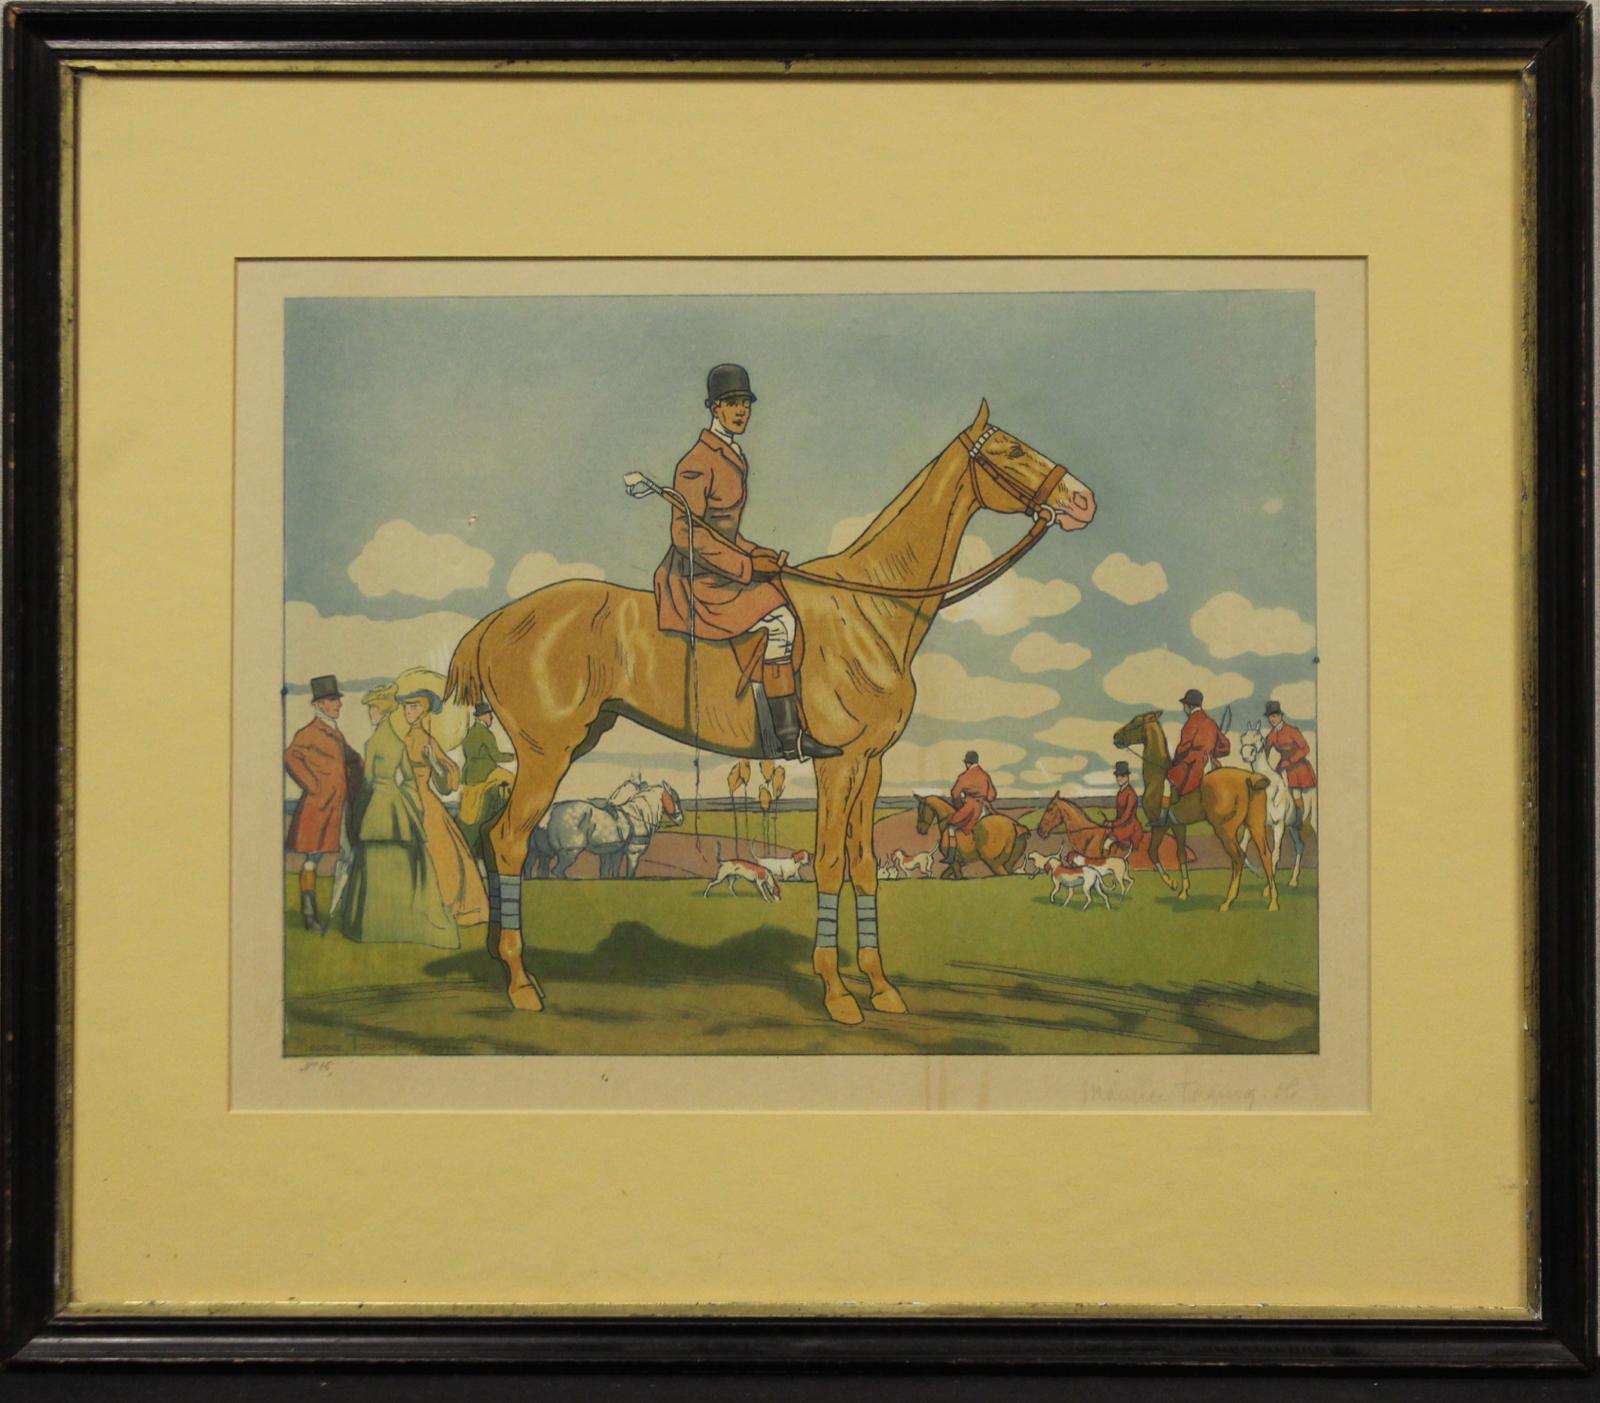 Classic hand-colour fox-hunt print No. 16 by Maurice Taguay 
c1905

Art Sz: 13 1/4"H x 17 1/4"W

Frame Sz: 20 3/4"H x 24"W

Born in the Marne region, Maurice Taquoy (1878-1952) spent much of his life in and around Paris, mostly in elegant company